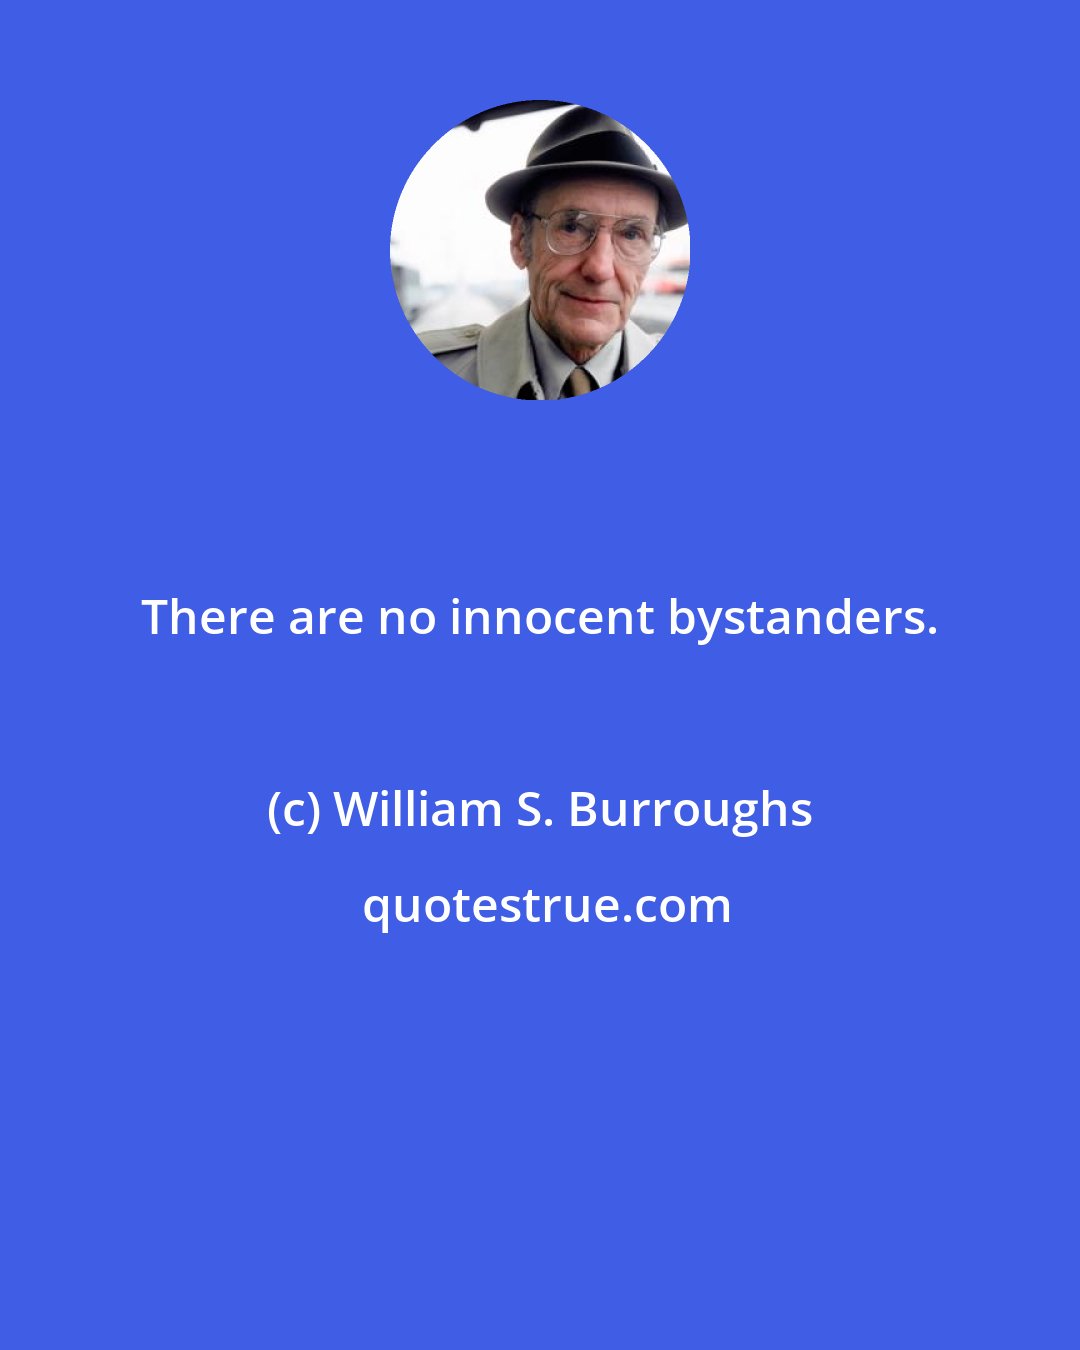 William S. Burroughs: There are no innocent bystanders.